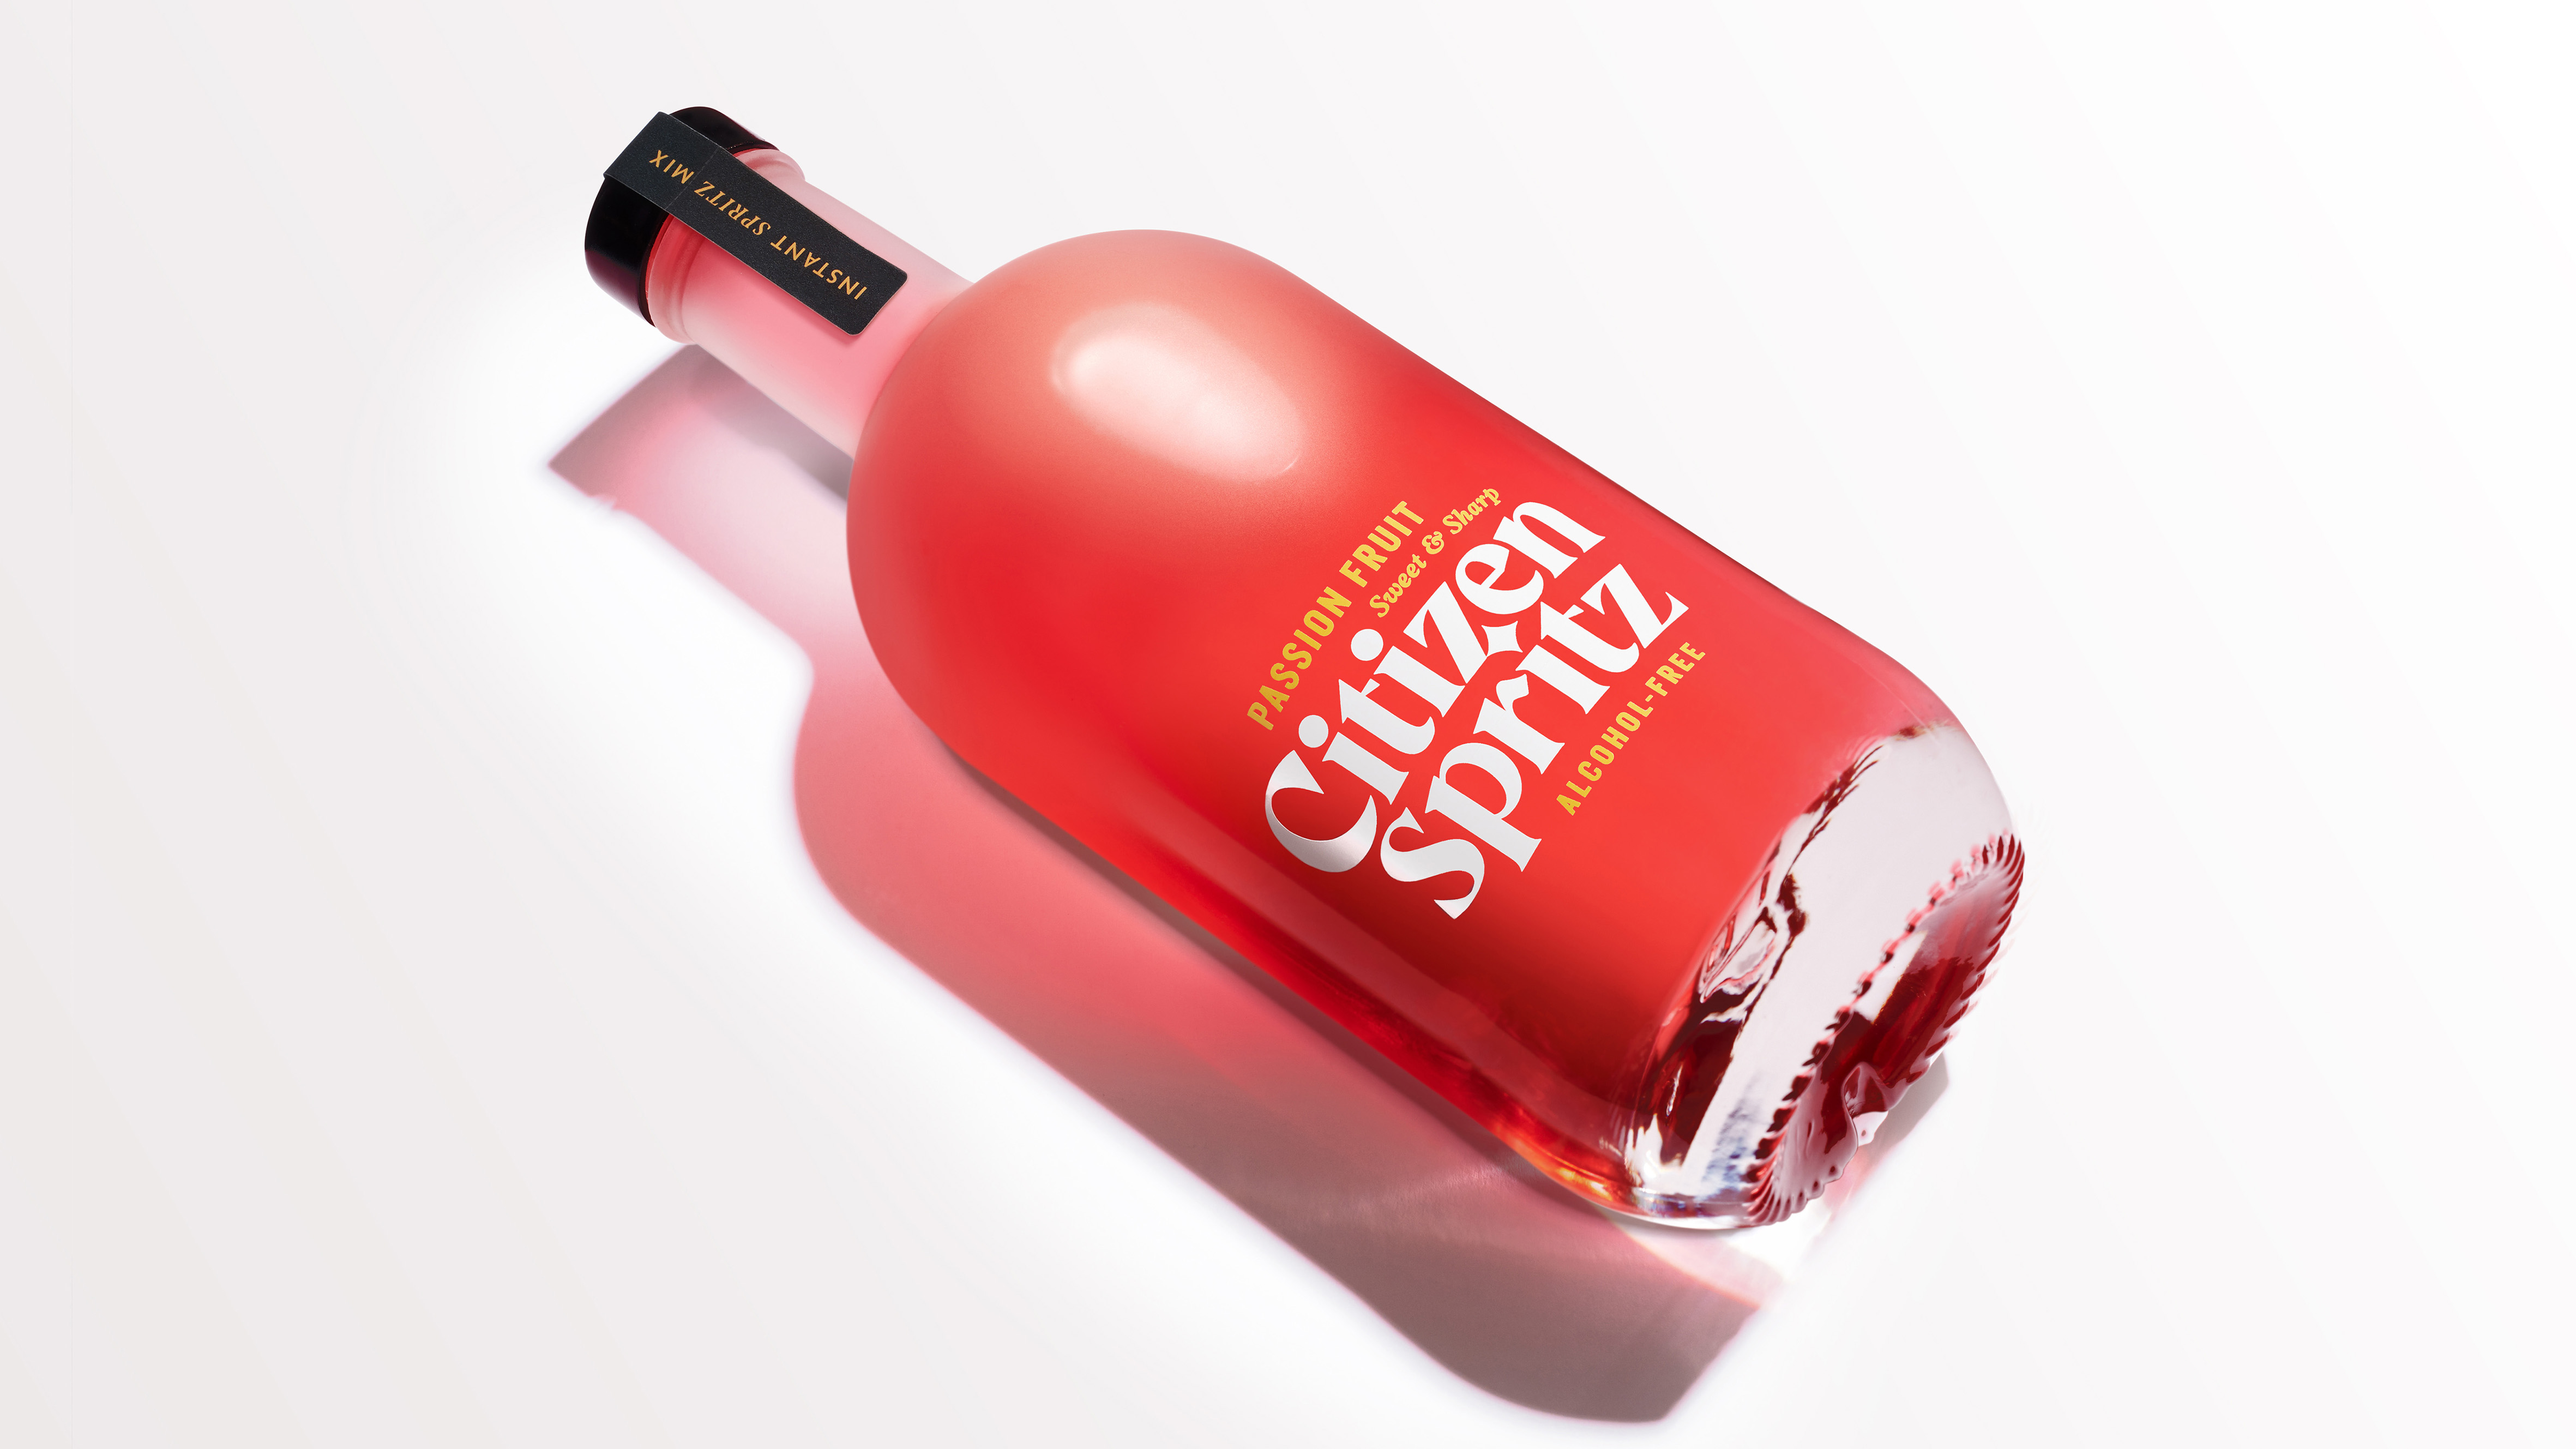 B&B Studio Creates Citizen Spritz – A Democratising New Drinks Brand Designed to Take the Faff Out of Alcohol-Free